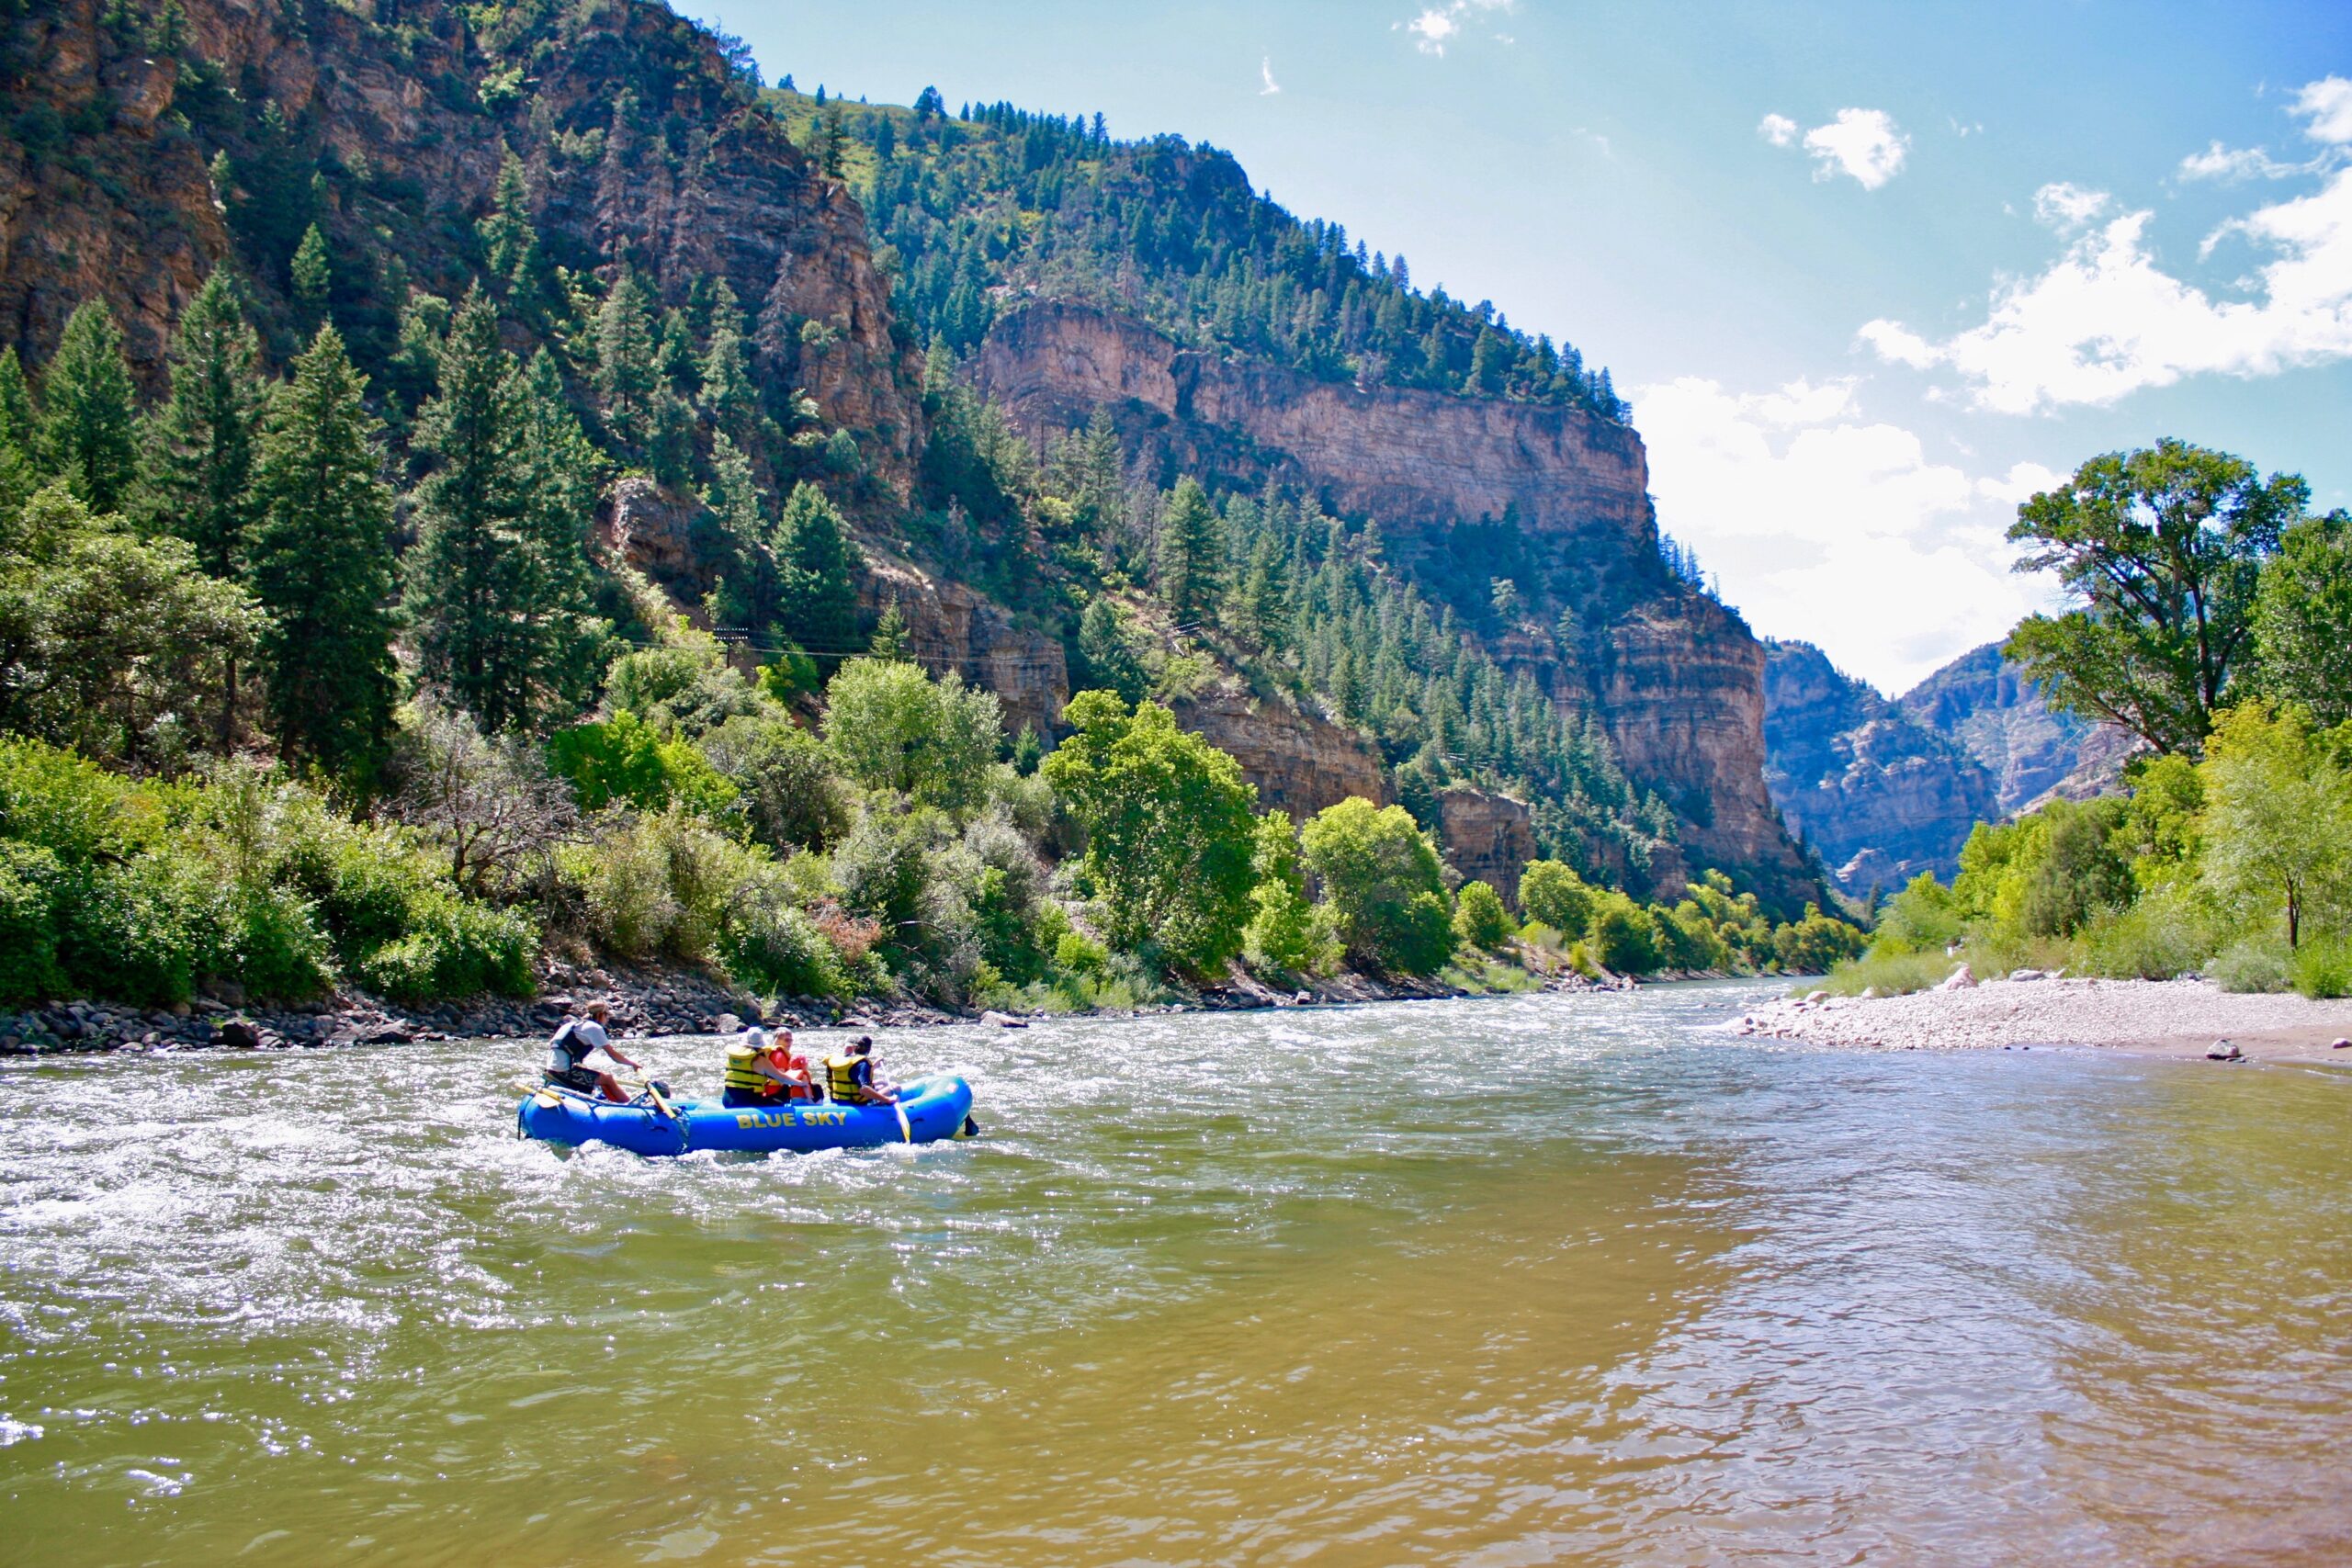 This serene photo captures a boat gracefully floating on the calm Class II waters of the river. The surroundings unfold with a perfect view of canyon walls and lush vegetation that encircle the river, creating a tranquil and picturesque scene.